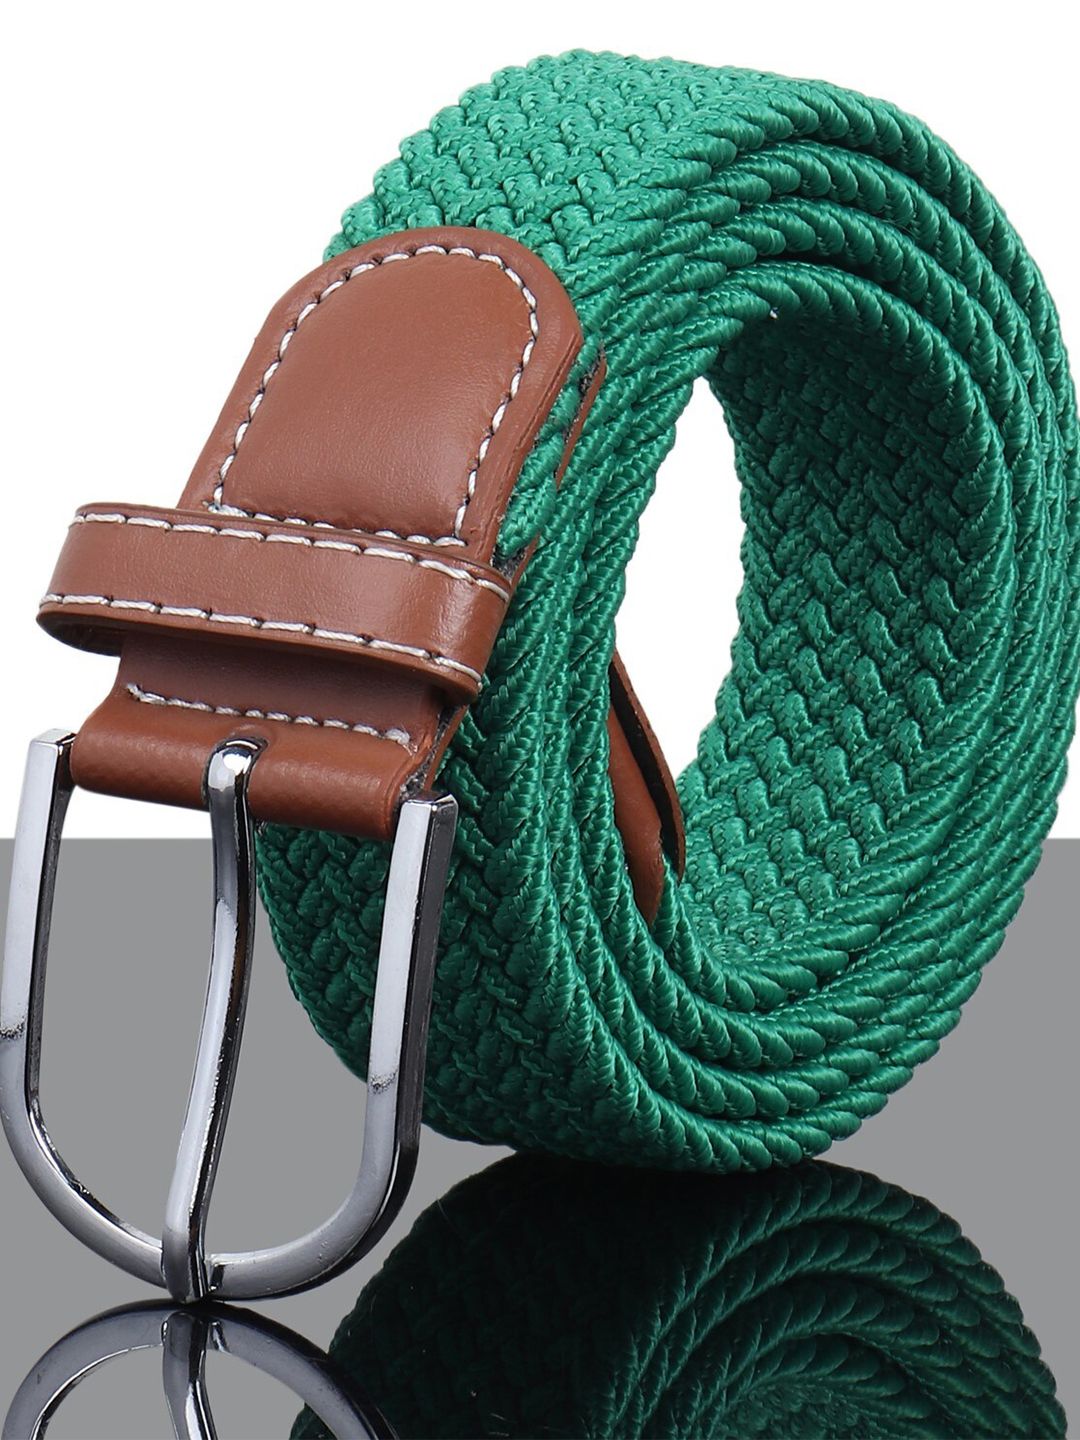 Kastner Unisex Green Braided Stretchable Belt Price in India